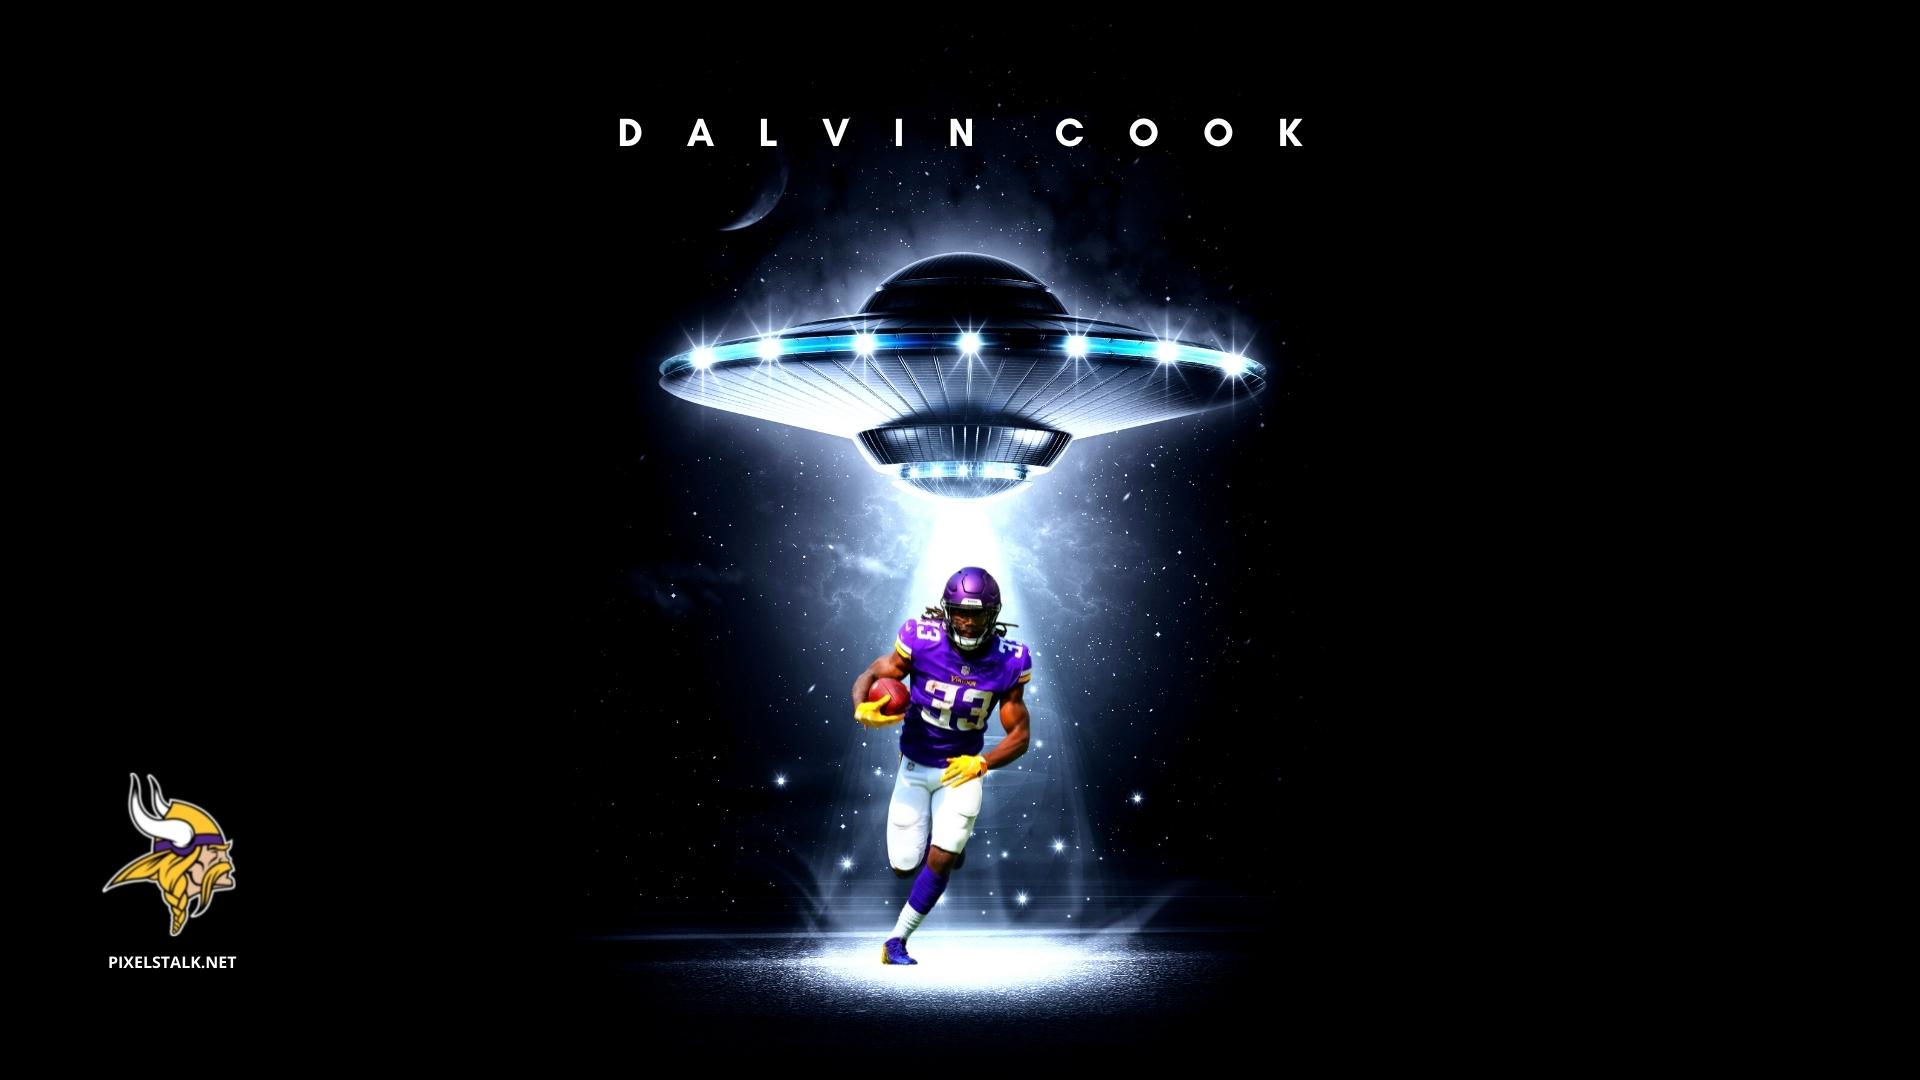 Injury forces Dalvin Cook to leave Vikings game early vs Lions  BVM Sports